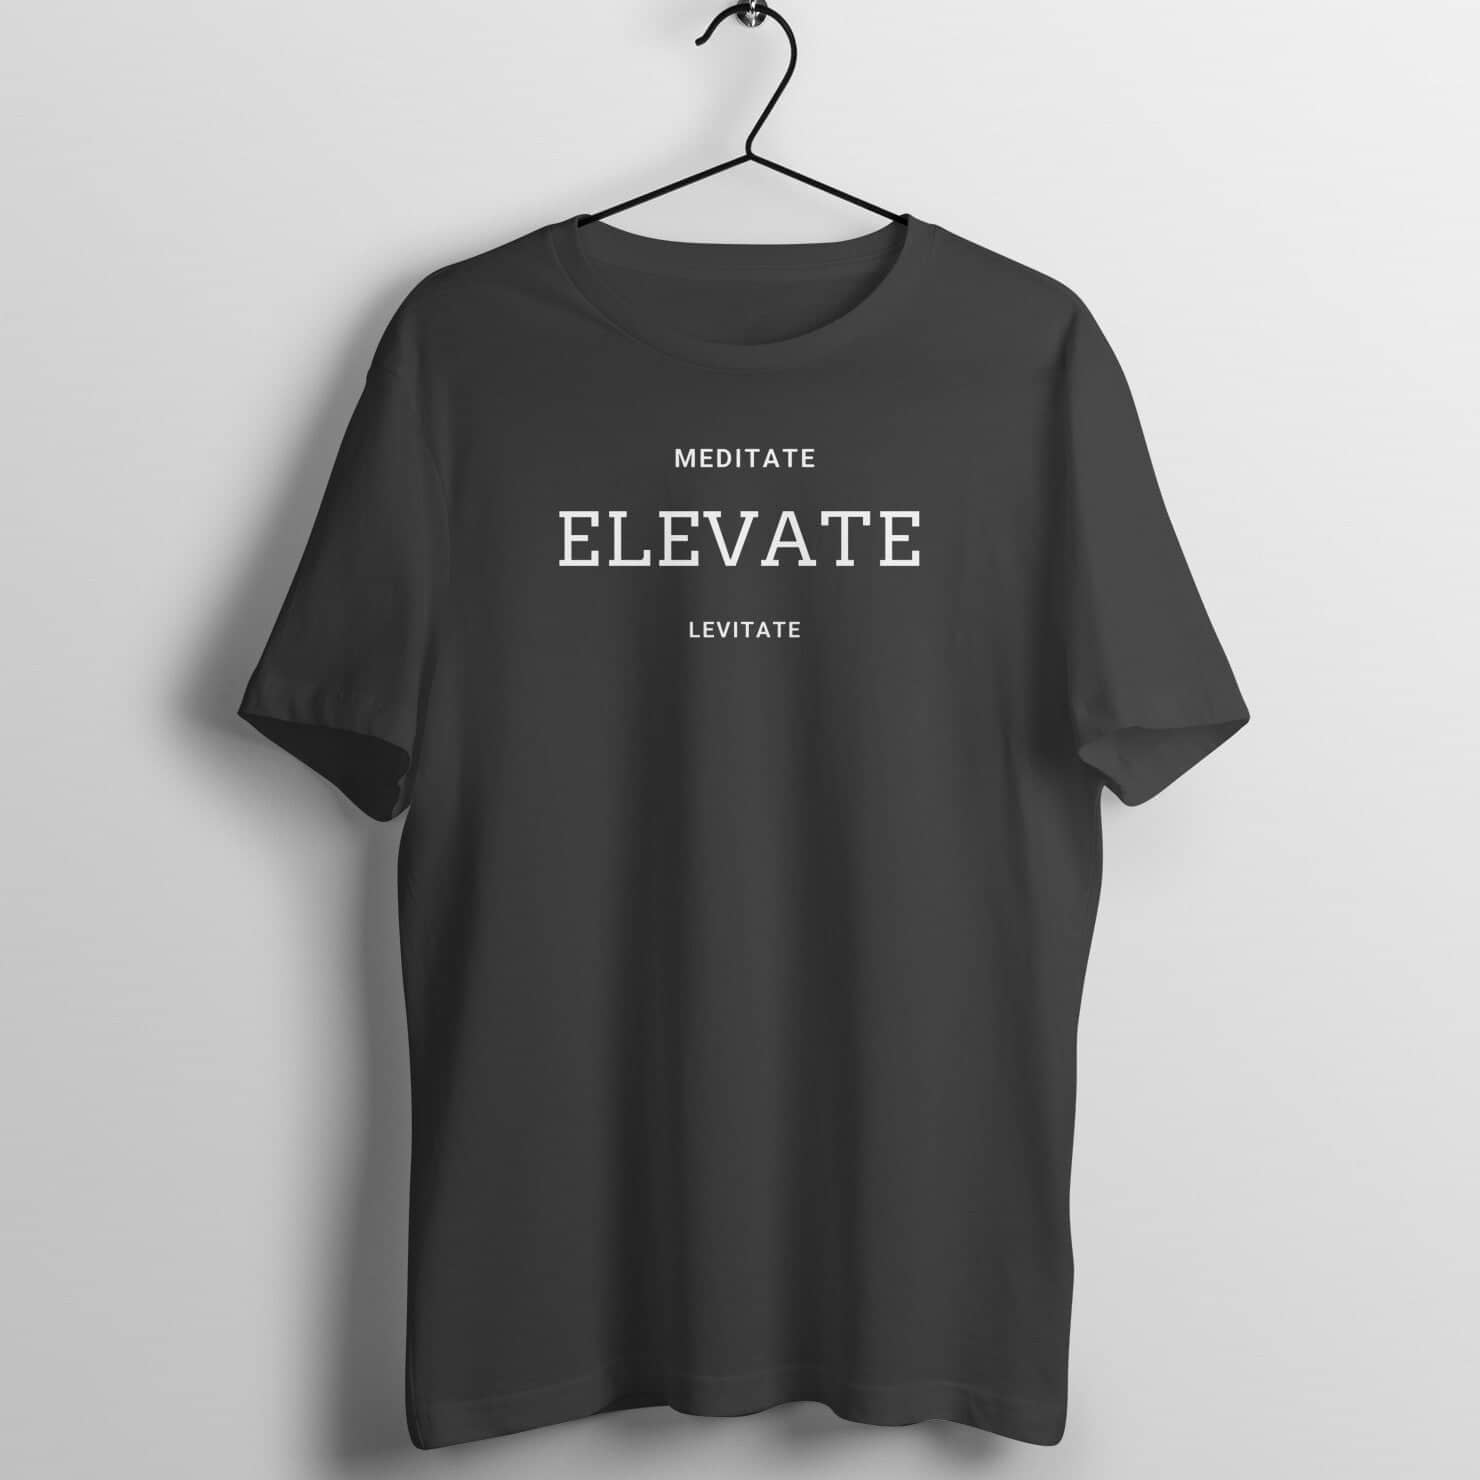 Meditate Elevate Levitate Special Spiritual T Shirt for Men and Women freeshipping - Catch My Drift India